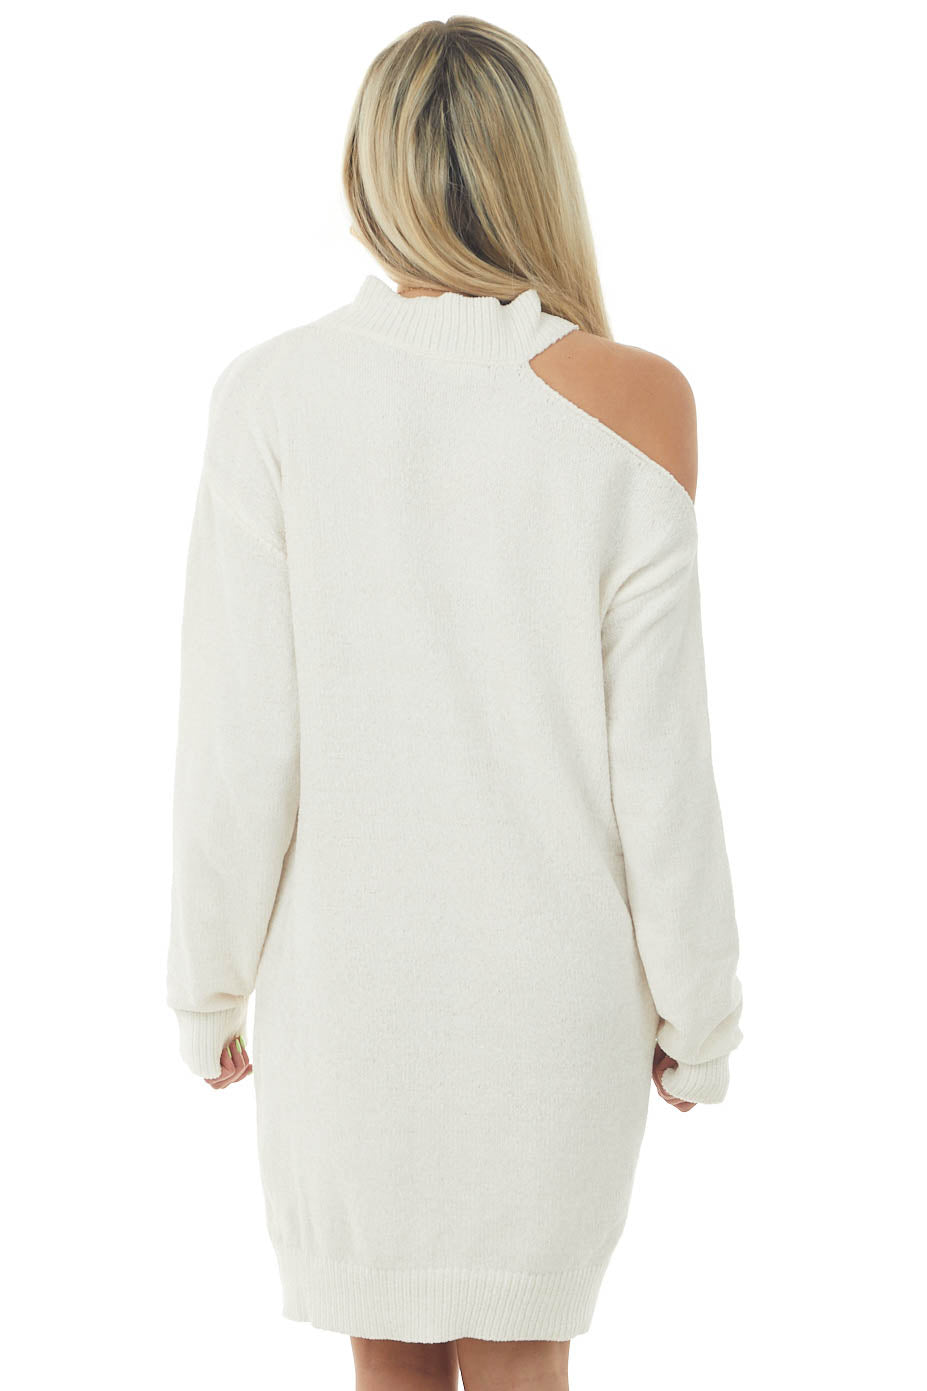 Ivory Chenille Sweater Dress with Single Cold Shoulder